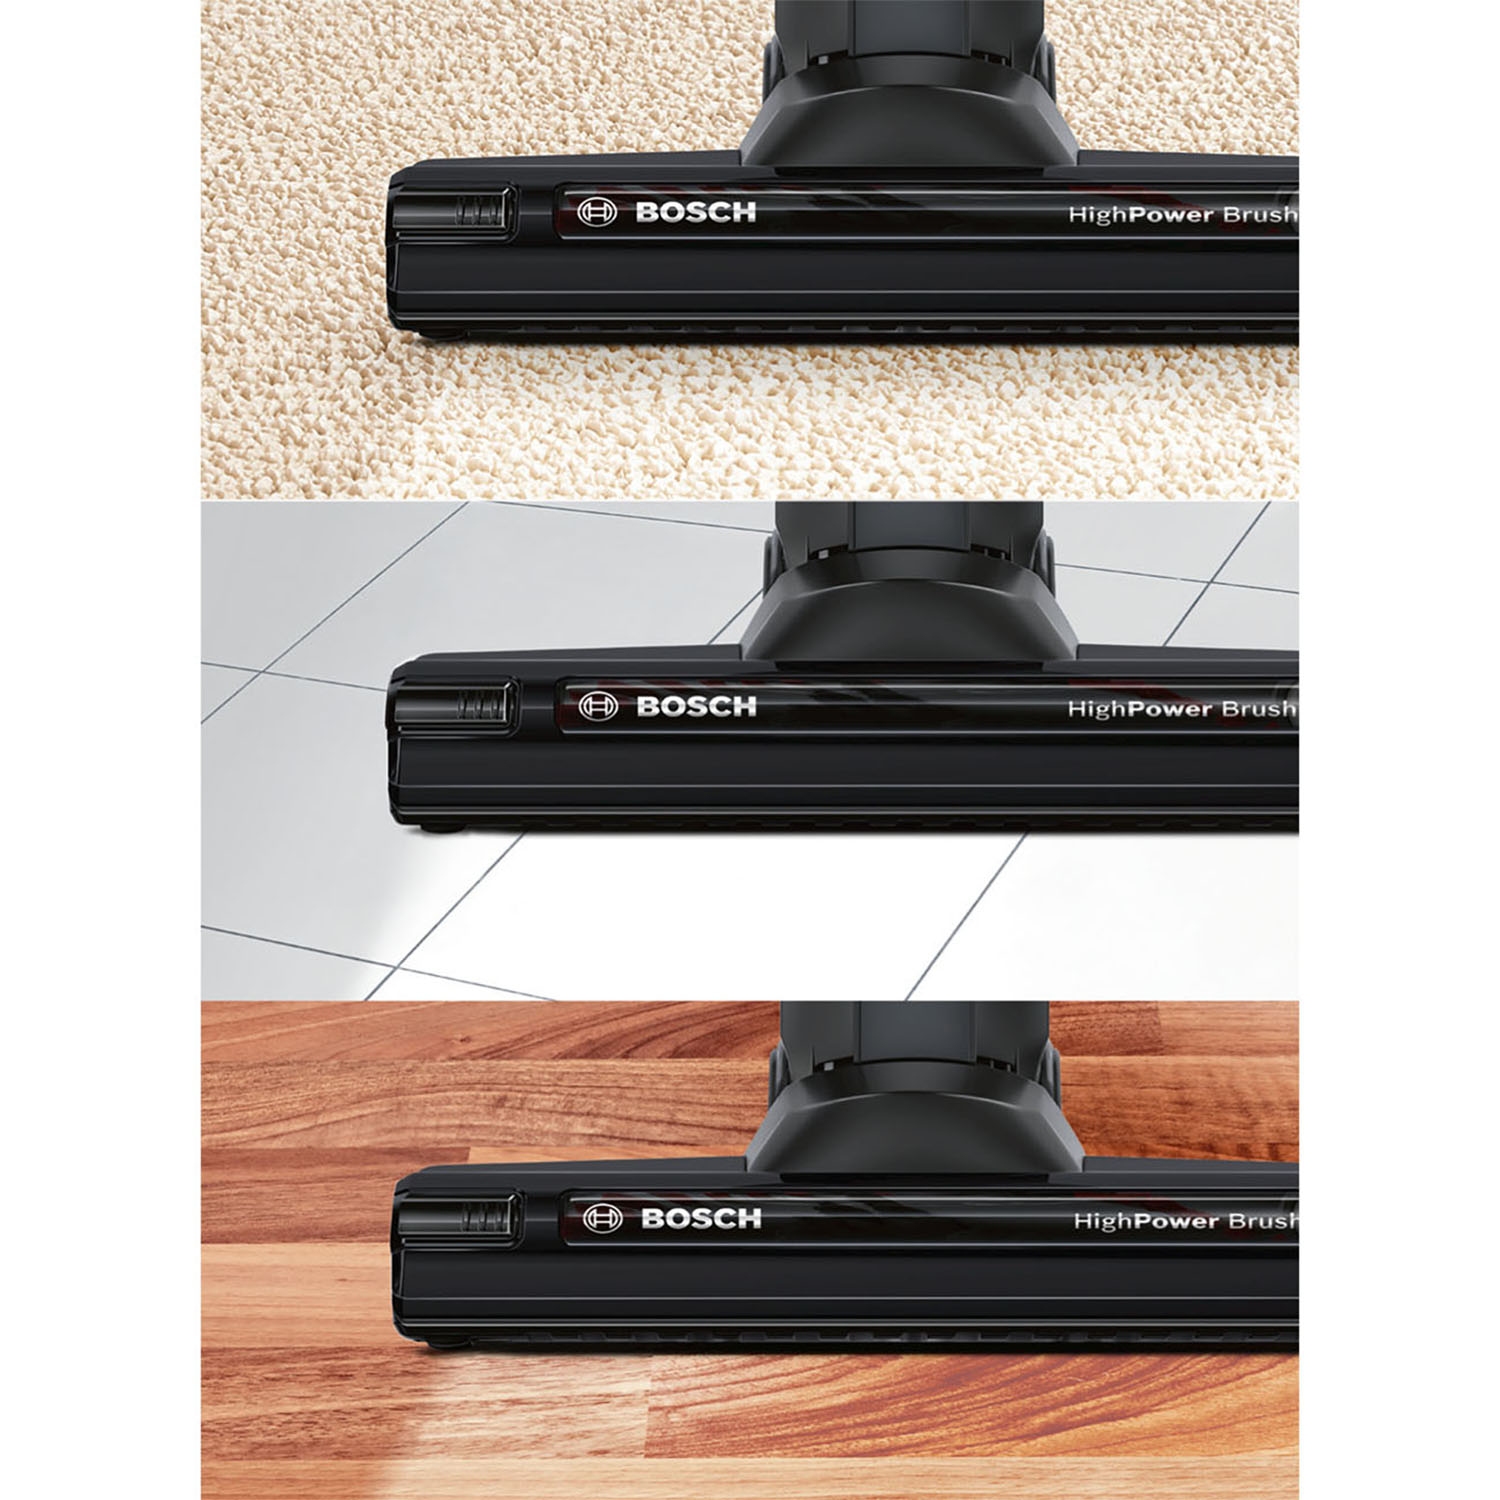 Bosch Athlet Vacuum Cleaner - 65 Minute Run Time - 7